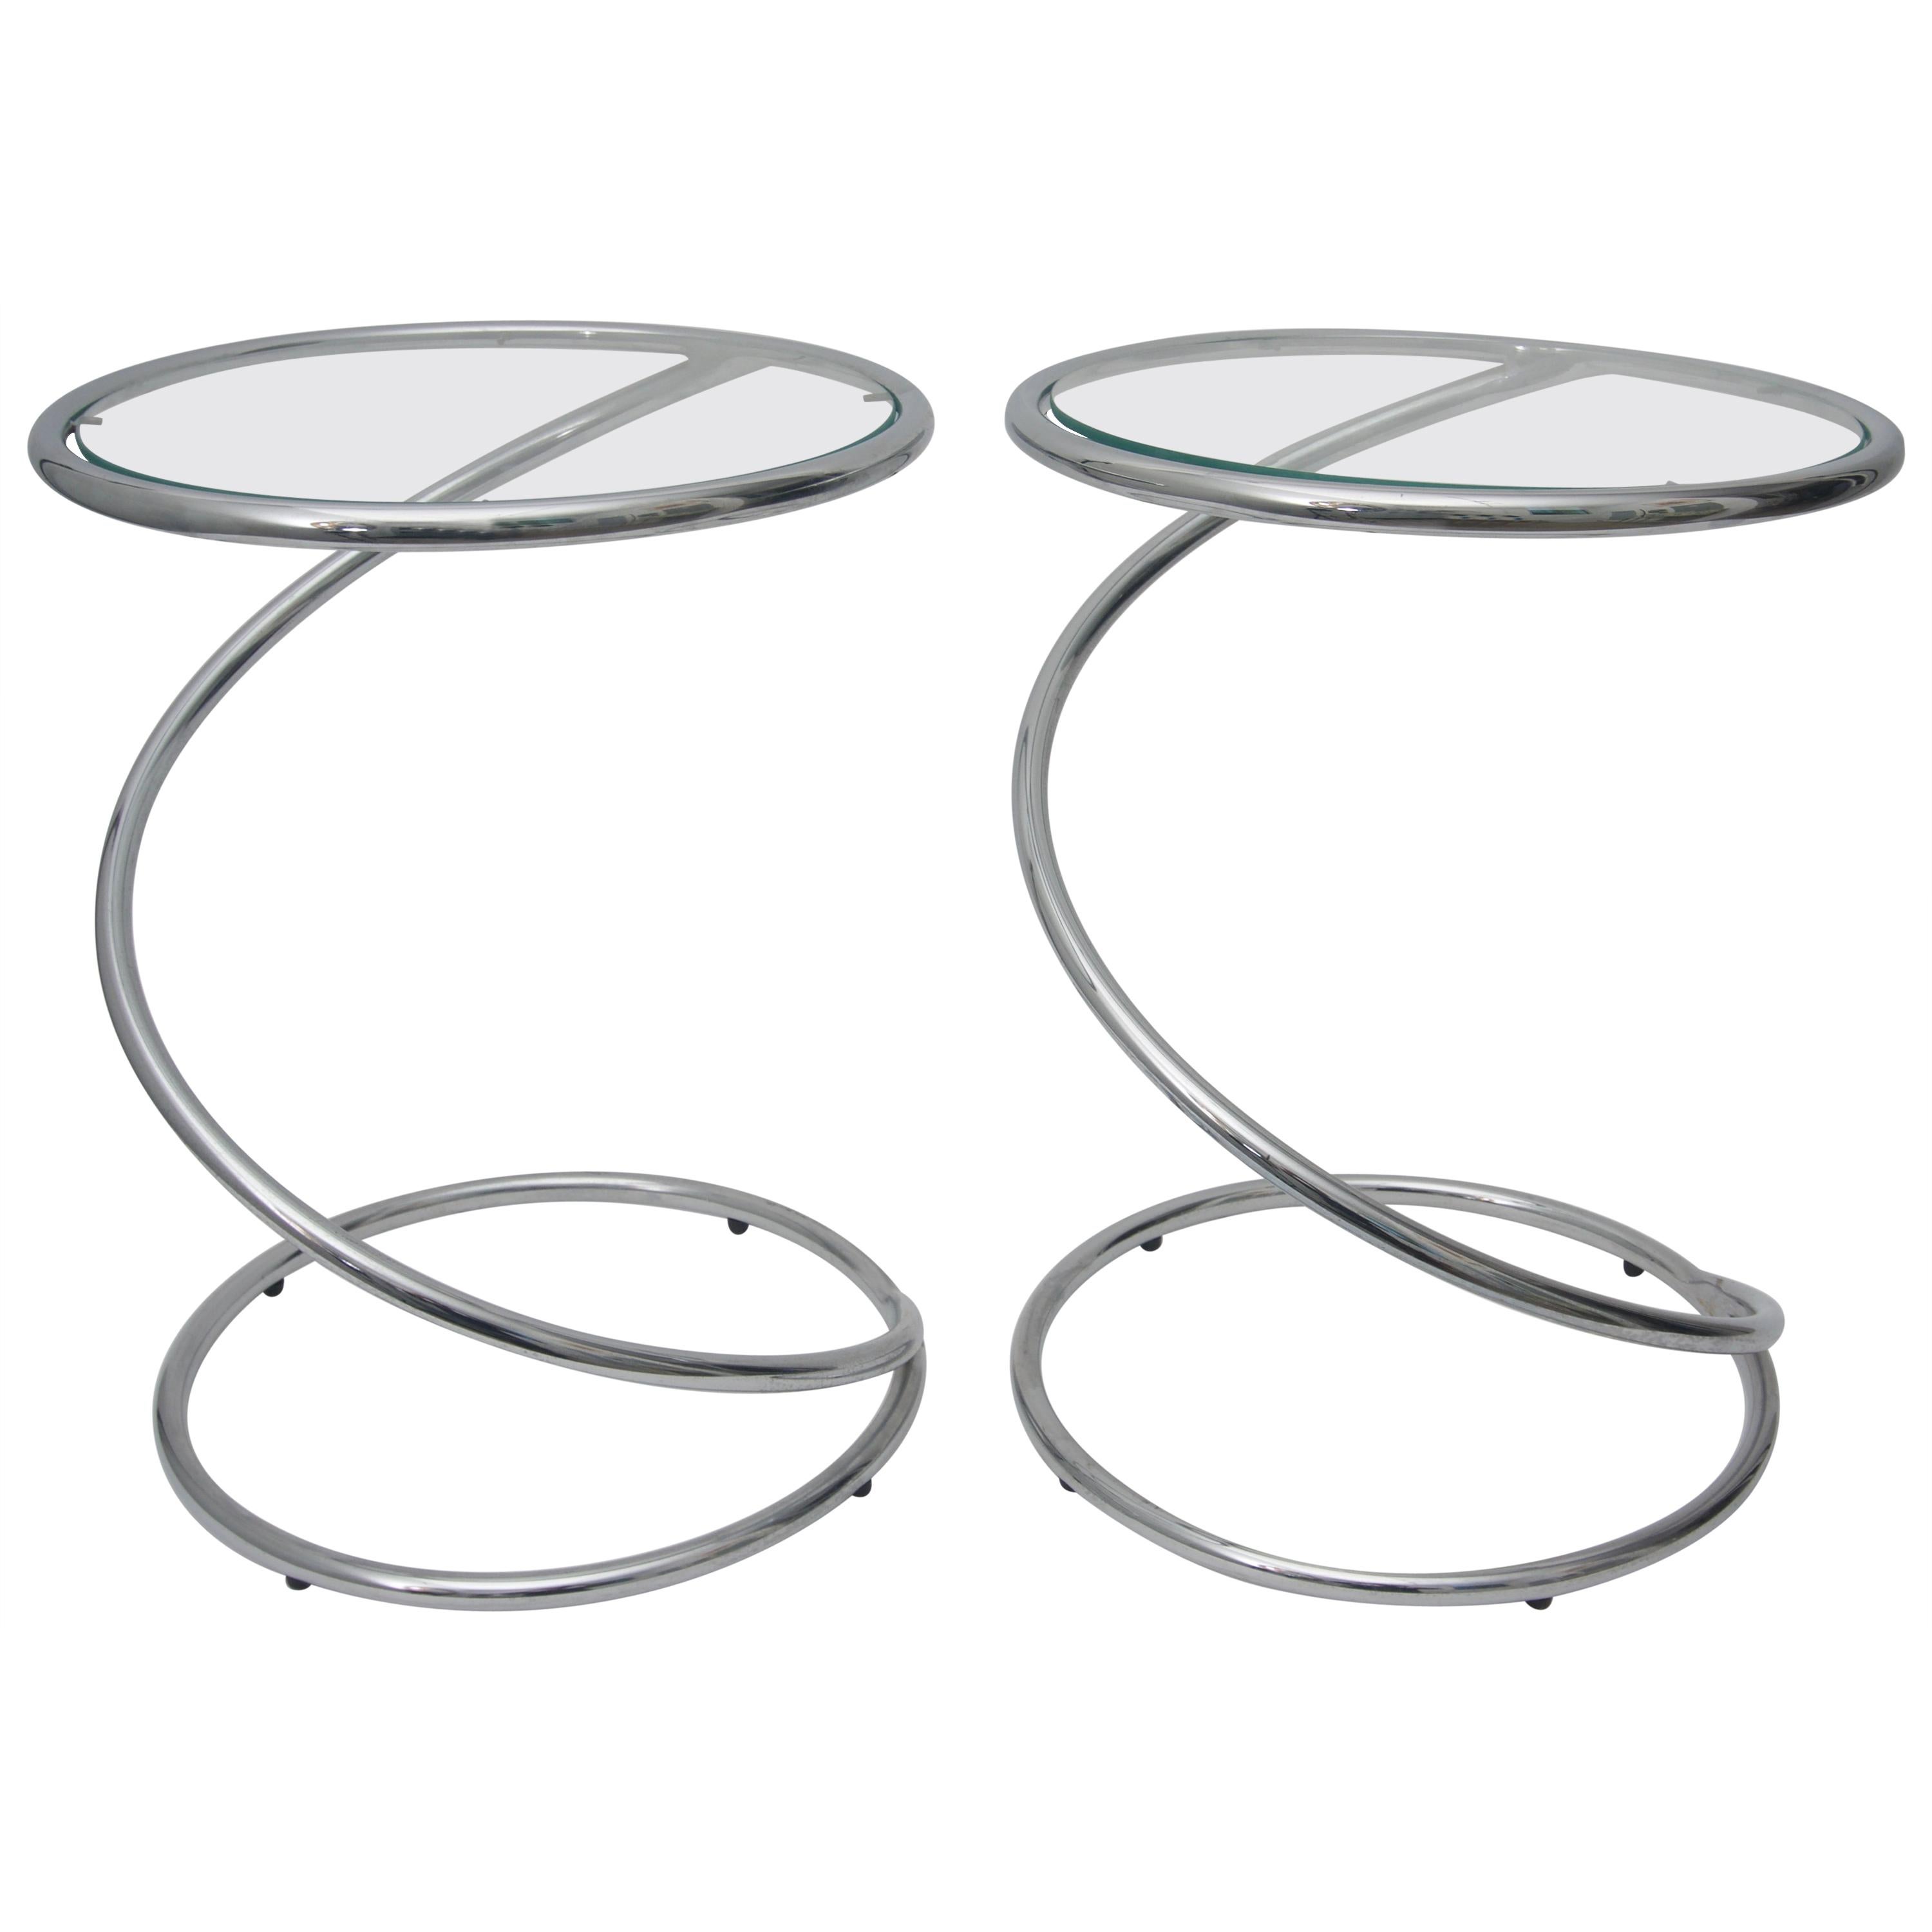 Pair of Round "Spring" Tables in Polished Chrome and Glass